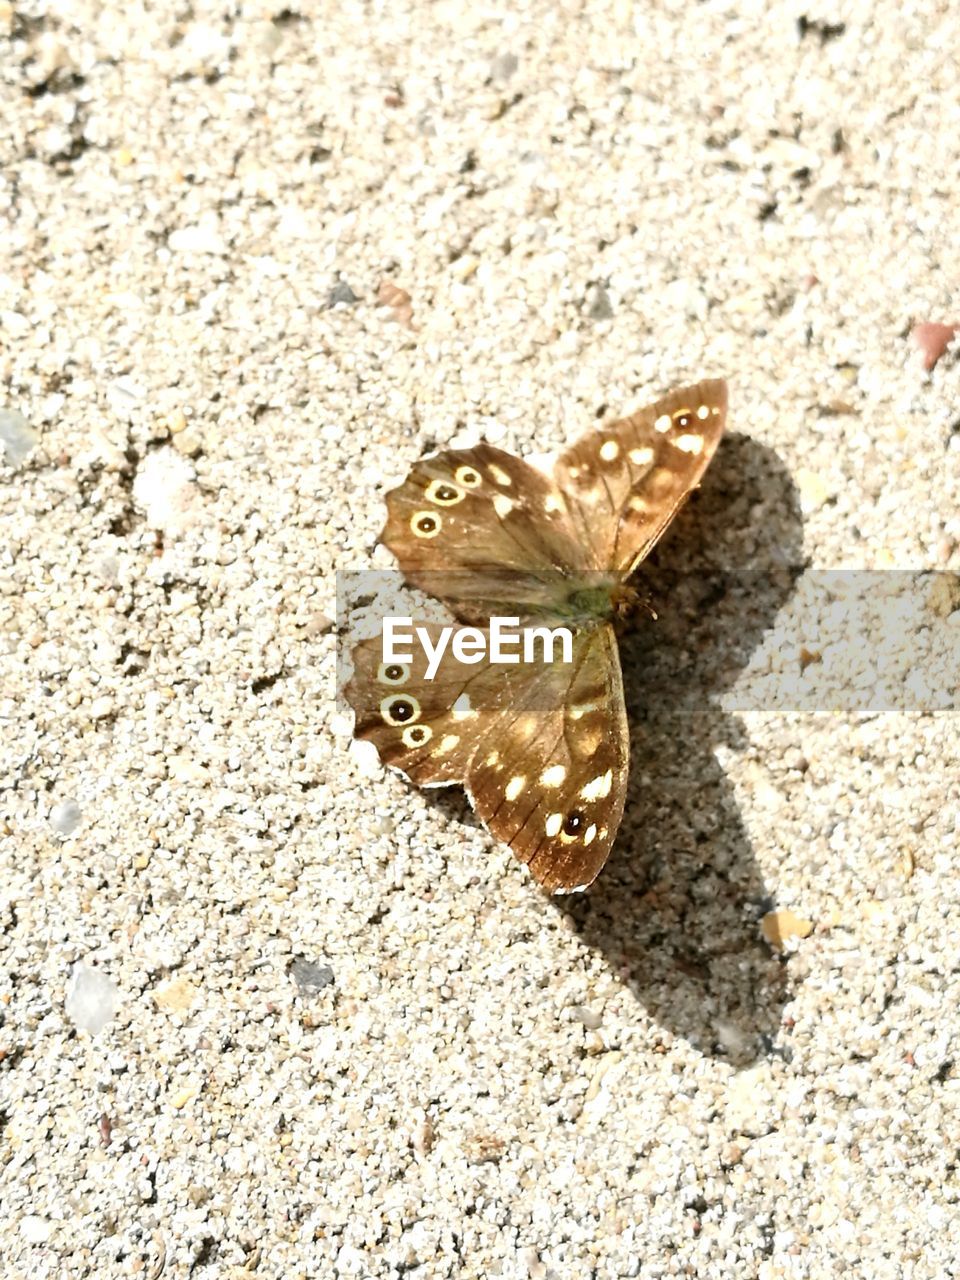 BUTTERFLY ON SAND